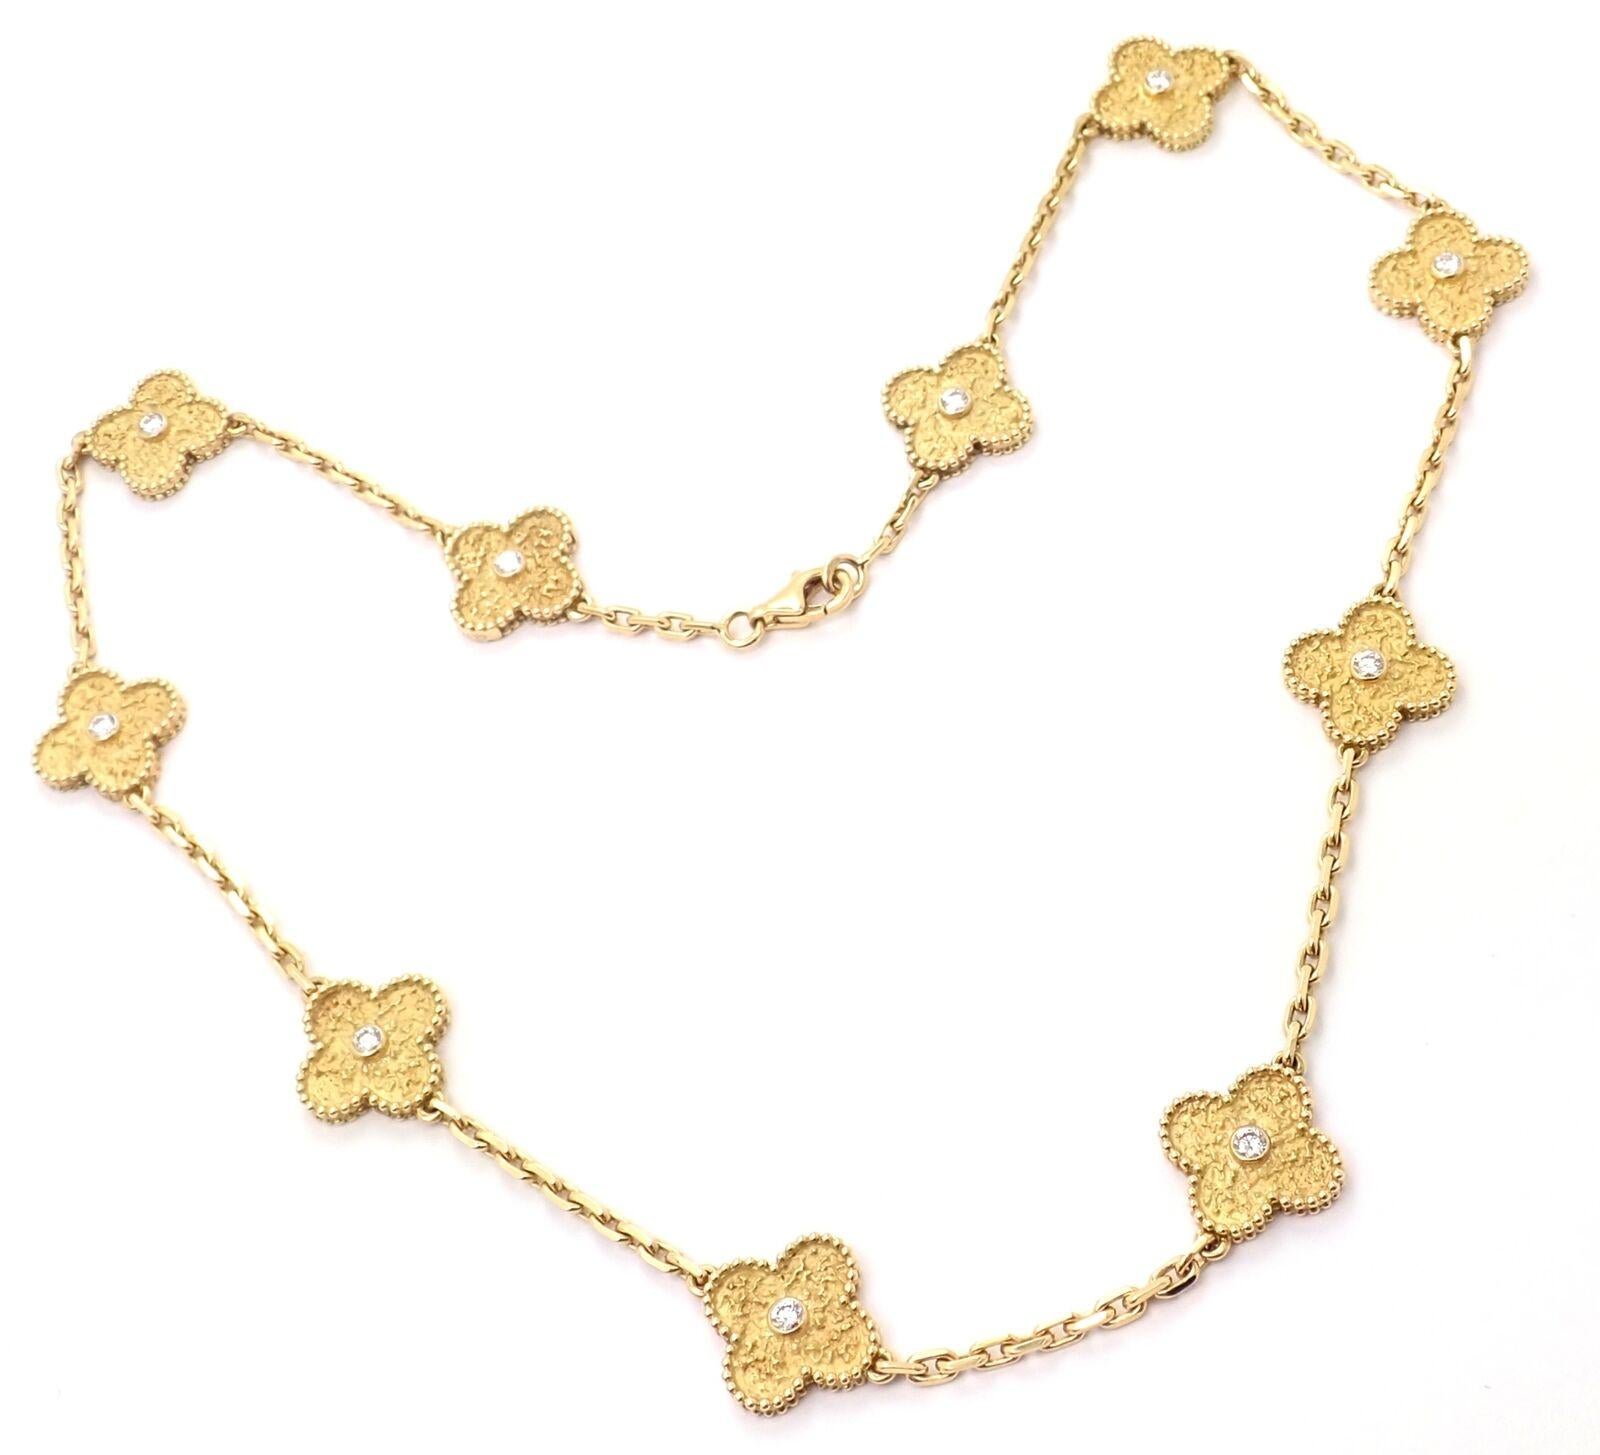 18k Yellow Gold 10 Motif Diamond Vintage Alhambra Necklace by Van Cleef & Arpels.
With 10 round brilliant cut diamond VVS1 clarity, 
E color total weight .60ct 
This necklace comes with certificate of authenticity from a VCA store and a VCA